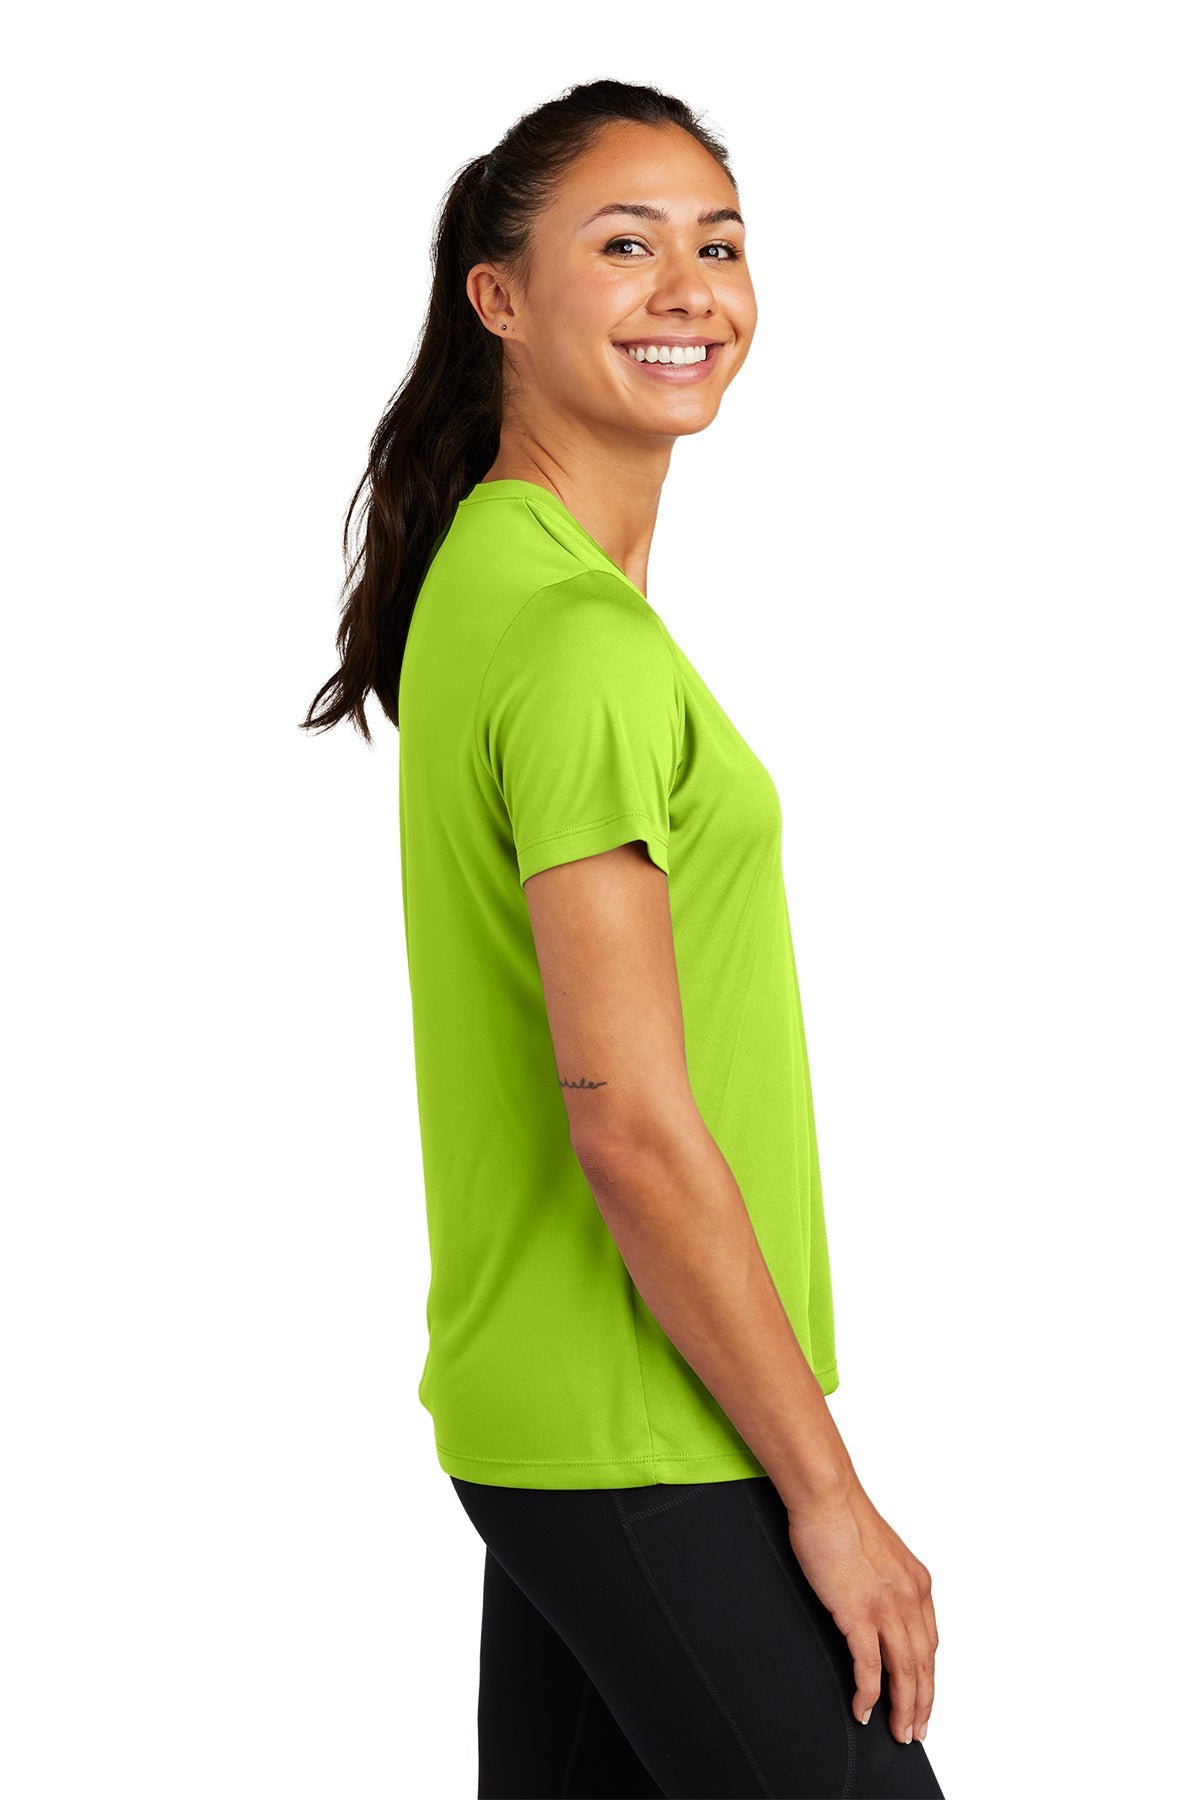 Sport-Tek Ladies PosiCharge Customized Competitor Tee's, Lime Shock